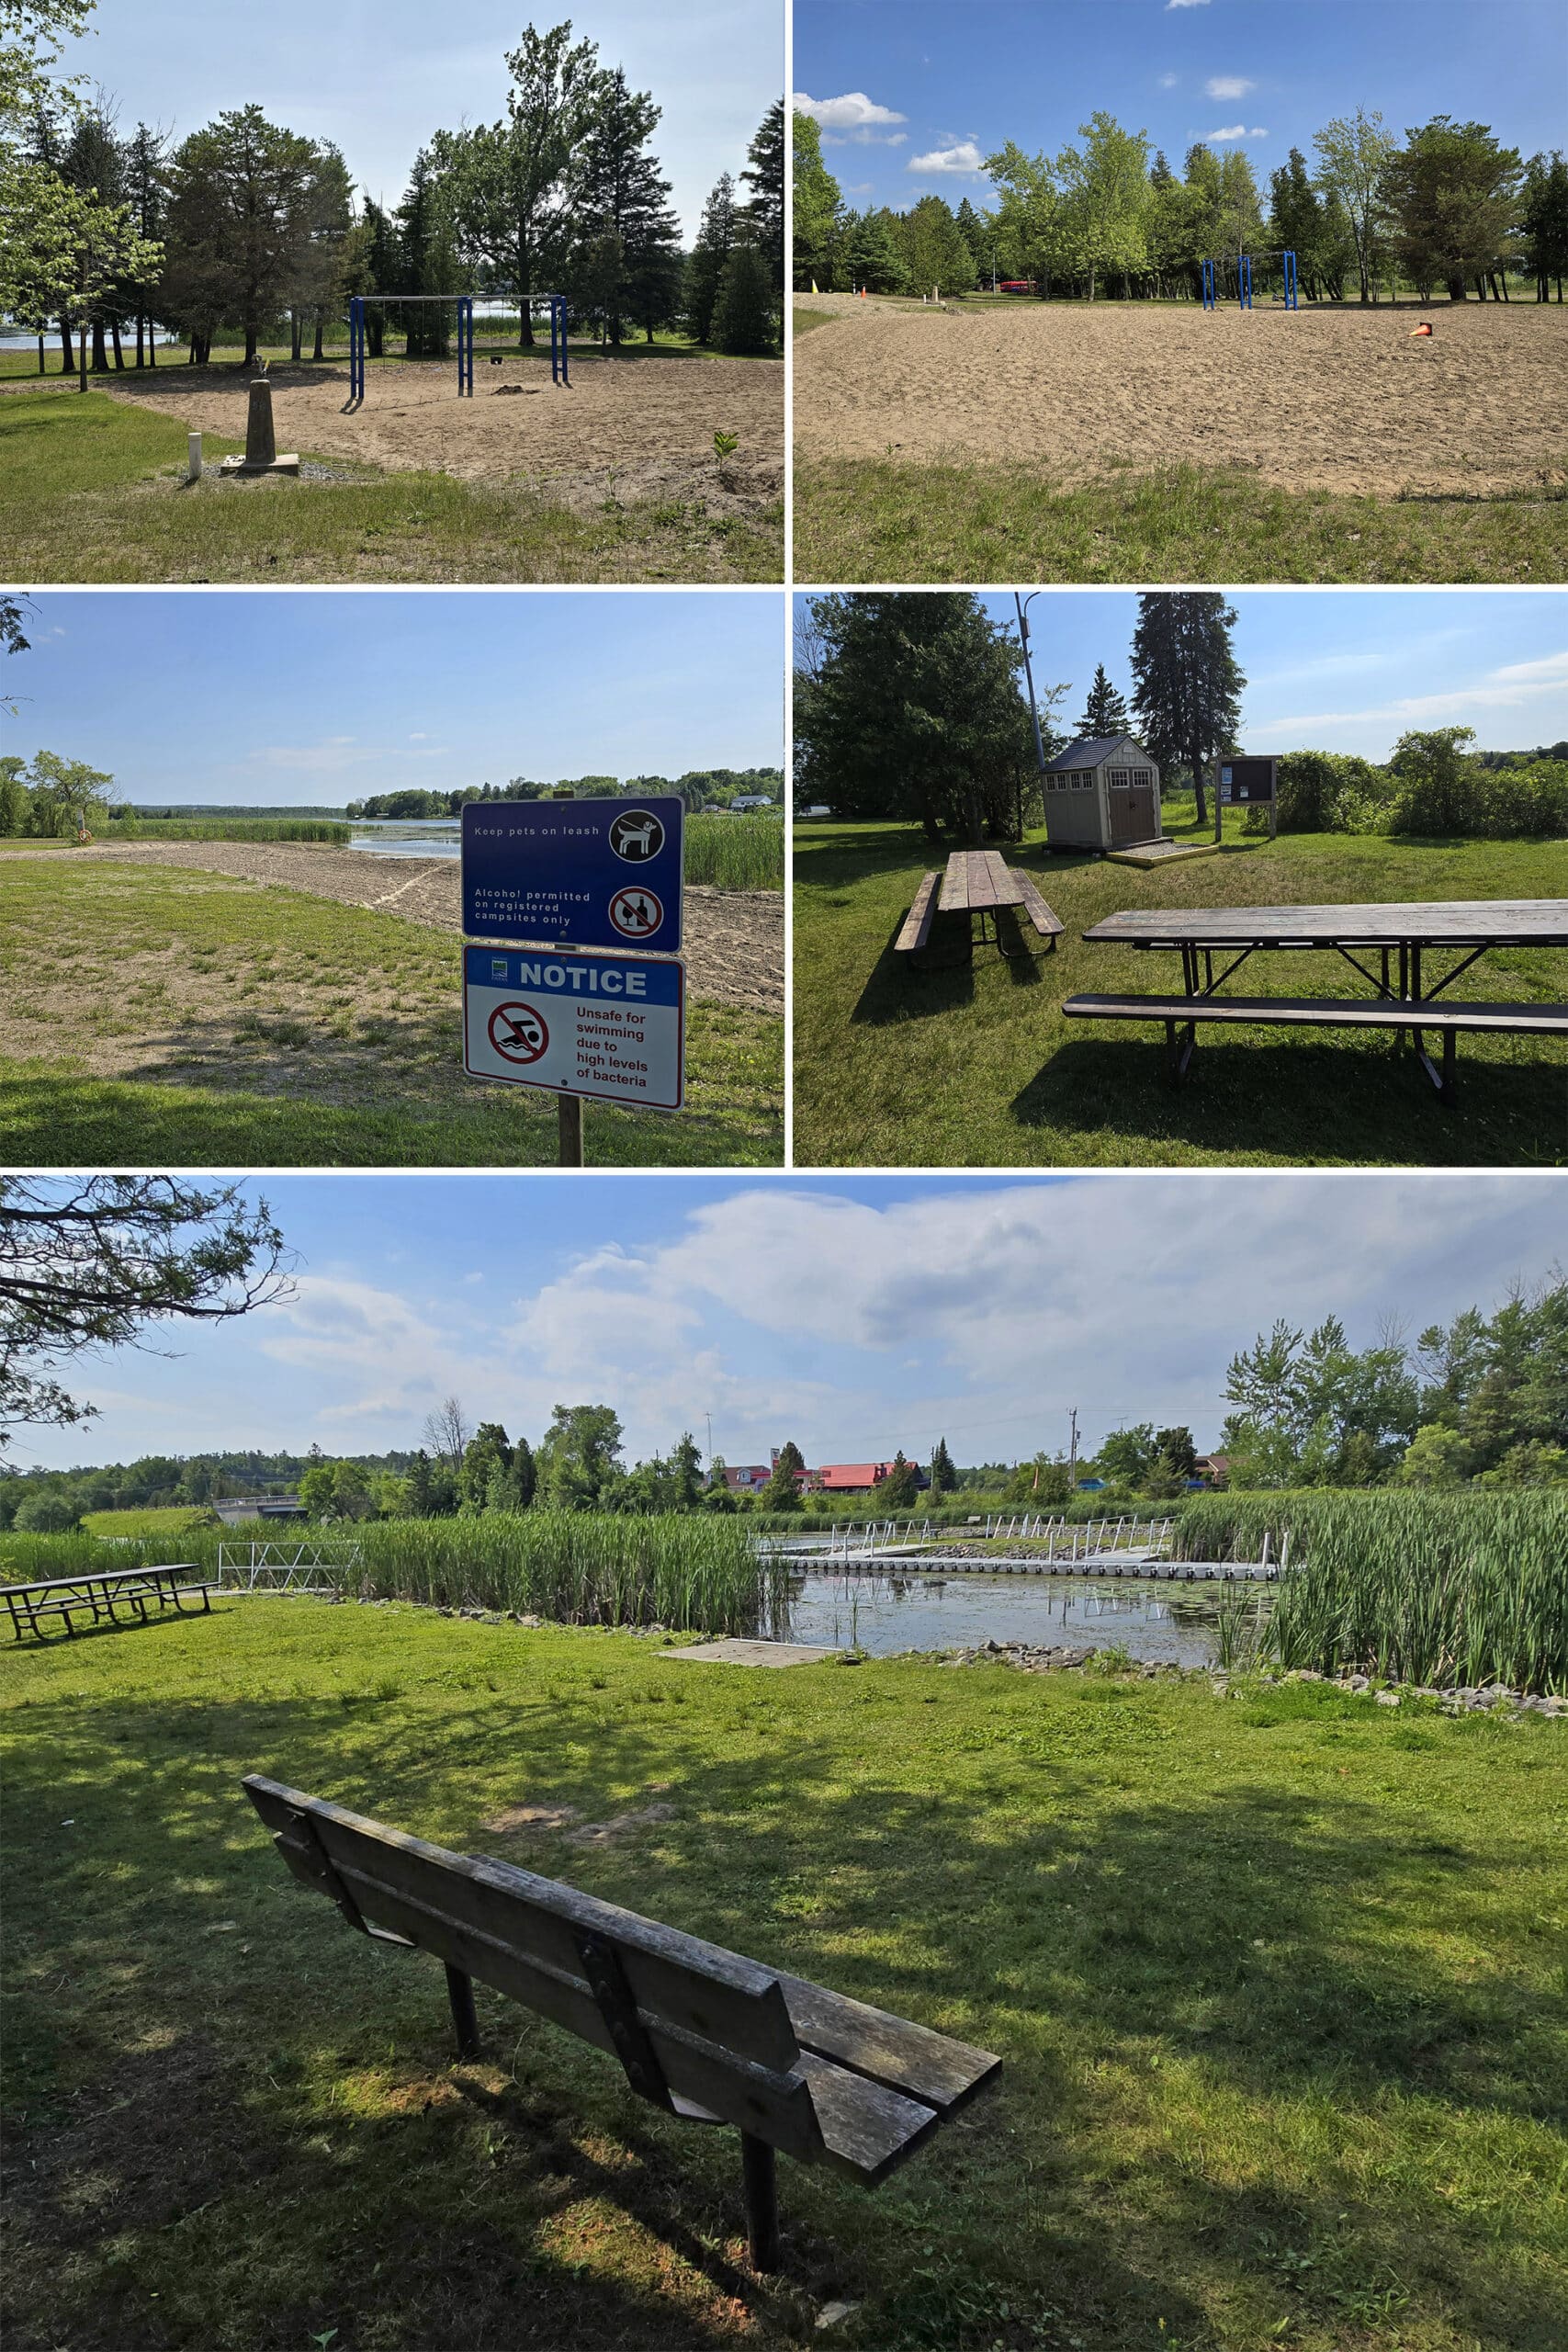 5 part image showing a playground with sand box, picnic area, and the rest of Emily Provincial Park’s day use area.